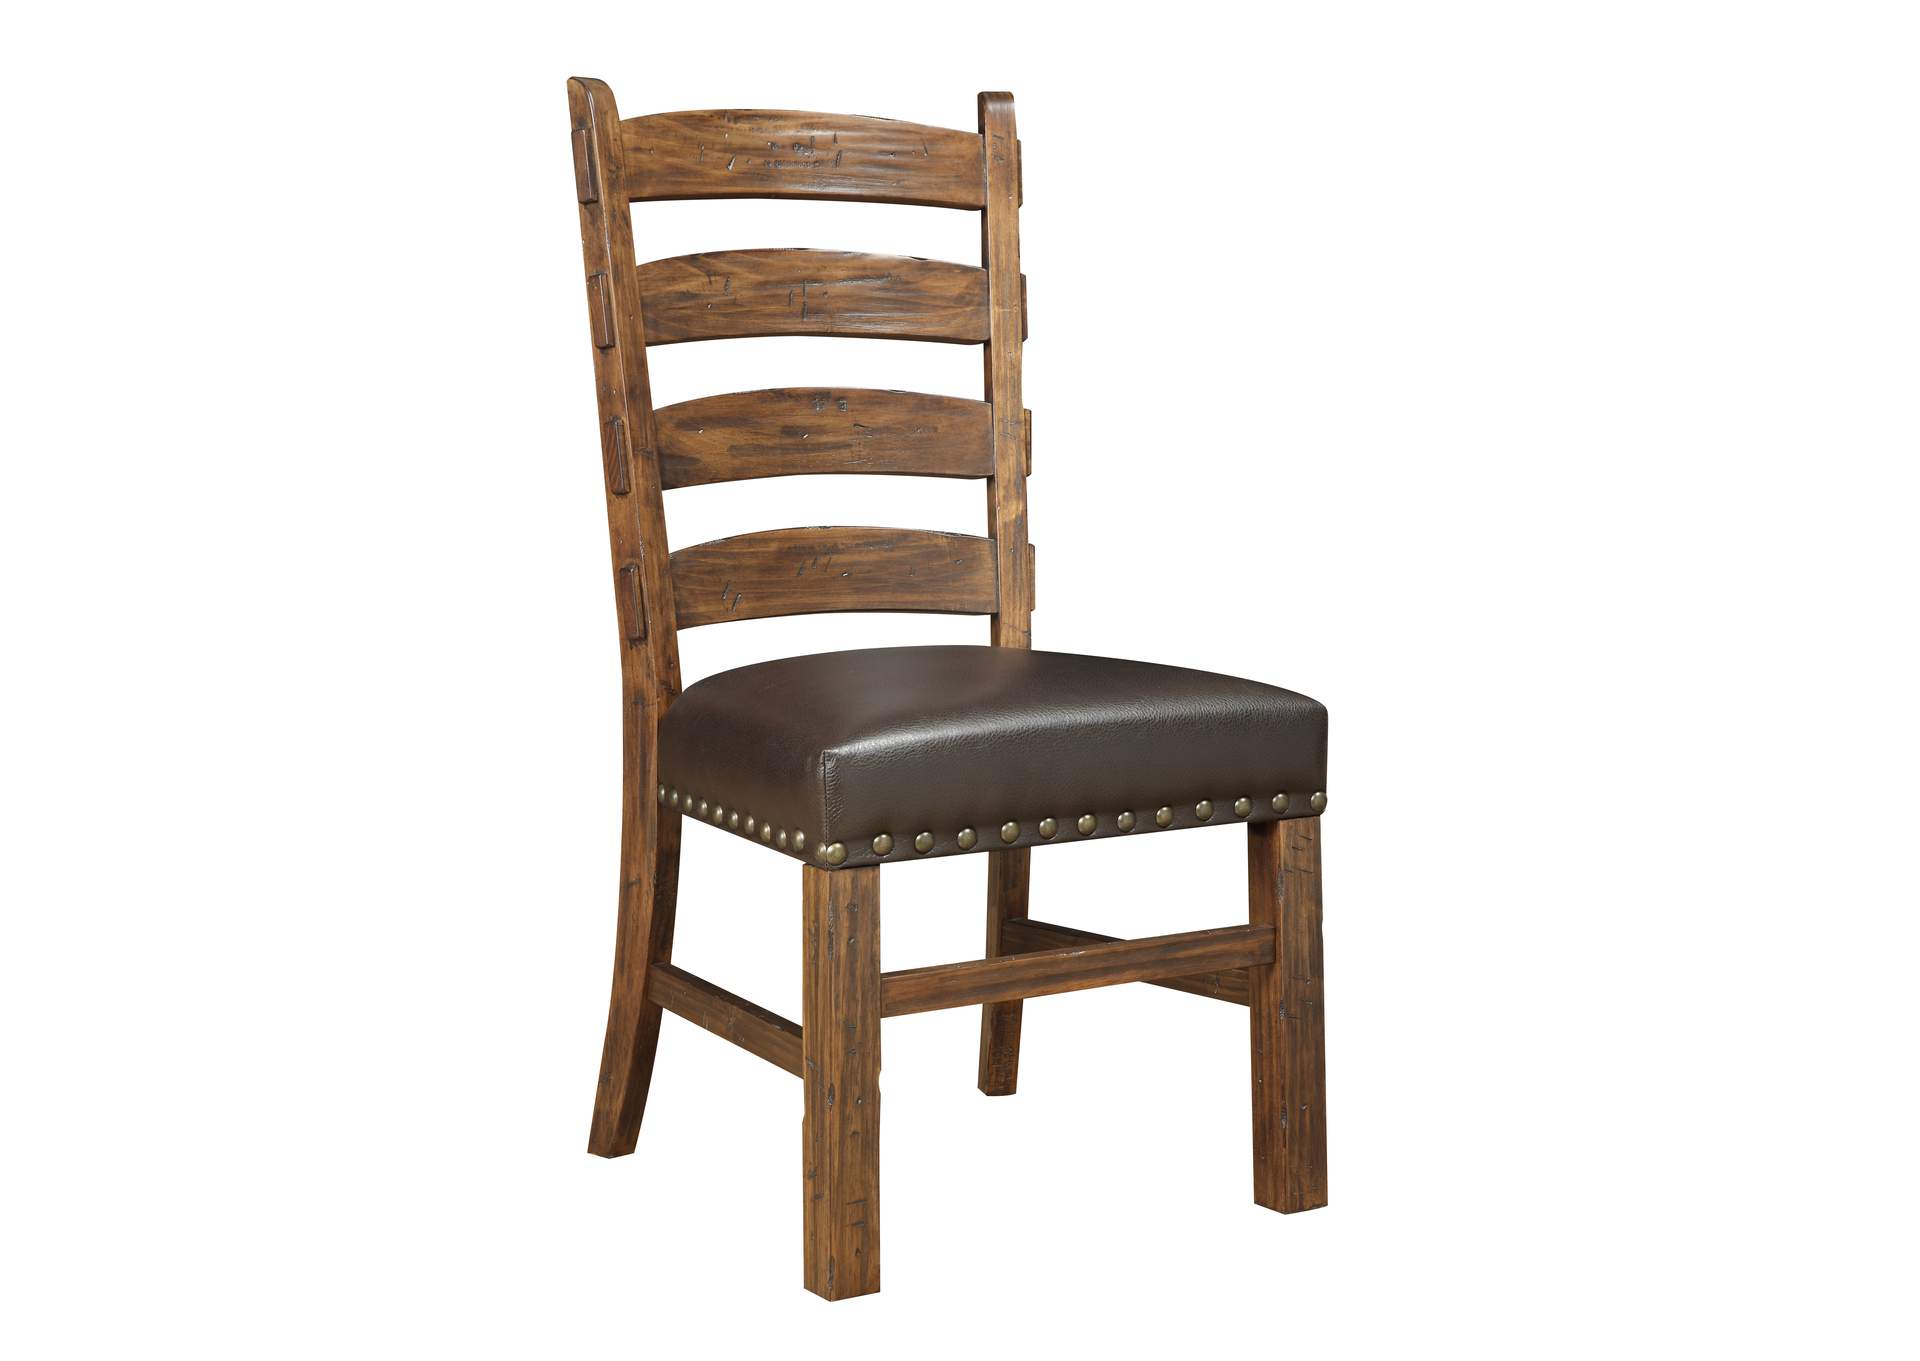 Chambers Creek Rustic Pine Upholstered Dining Chair,Emerald Home Furnishings